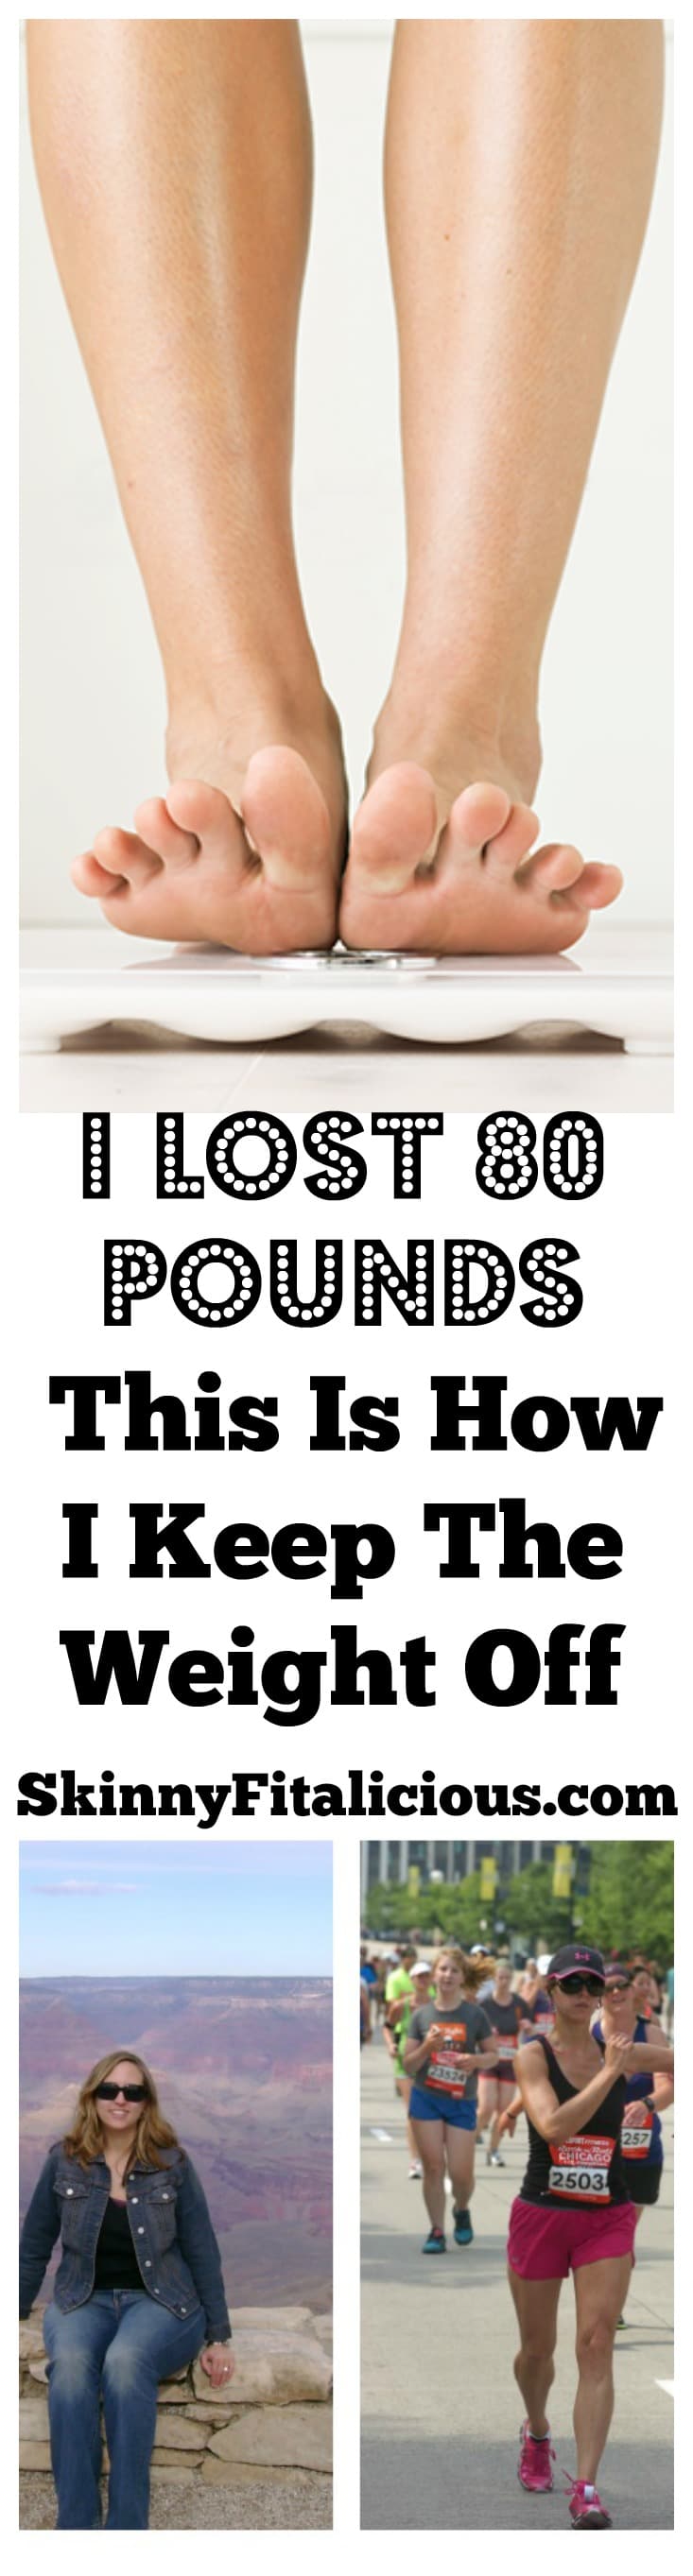 Seven years ago I lost 80 pounds. Most people who lose a lot of weight gain it back, but I have managed to keep it off. This is how I keep the weight off.